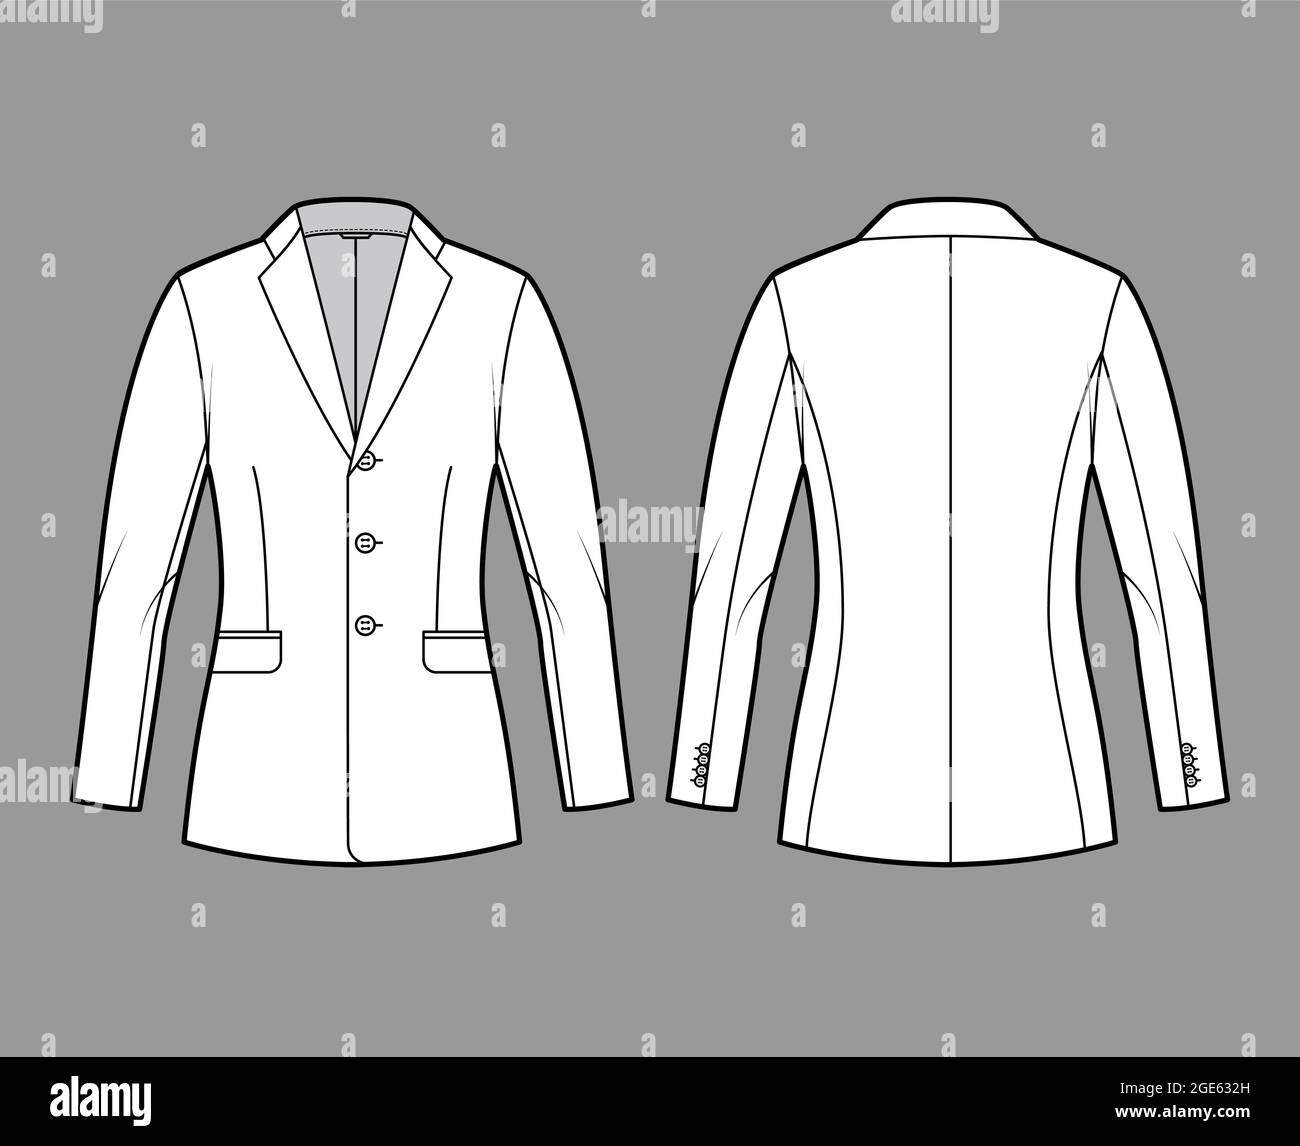 Blazer fitted jacket suit technical fashion illustration with single breasted, notched lapel collar, flap pockets, fitted body, hip length. Flat template front, back, white color. Women men CAD mockup Stock Vector